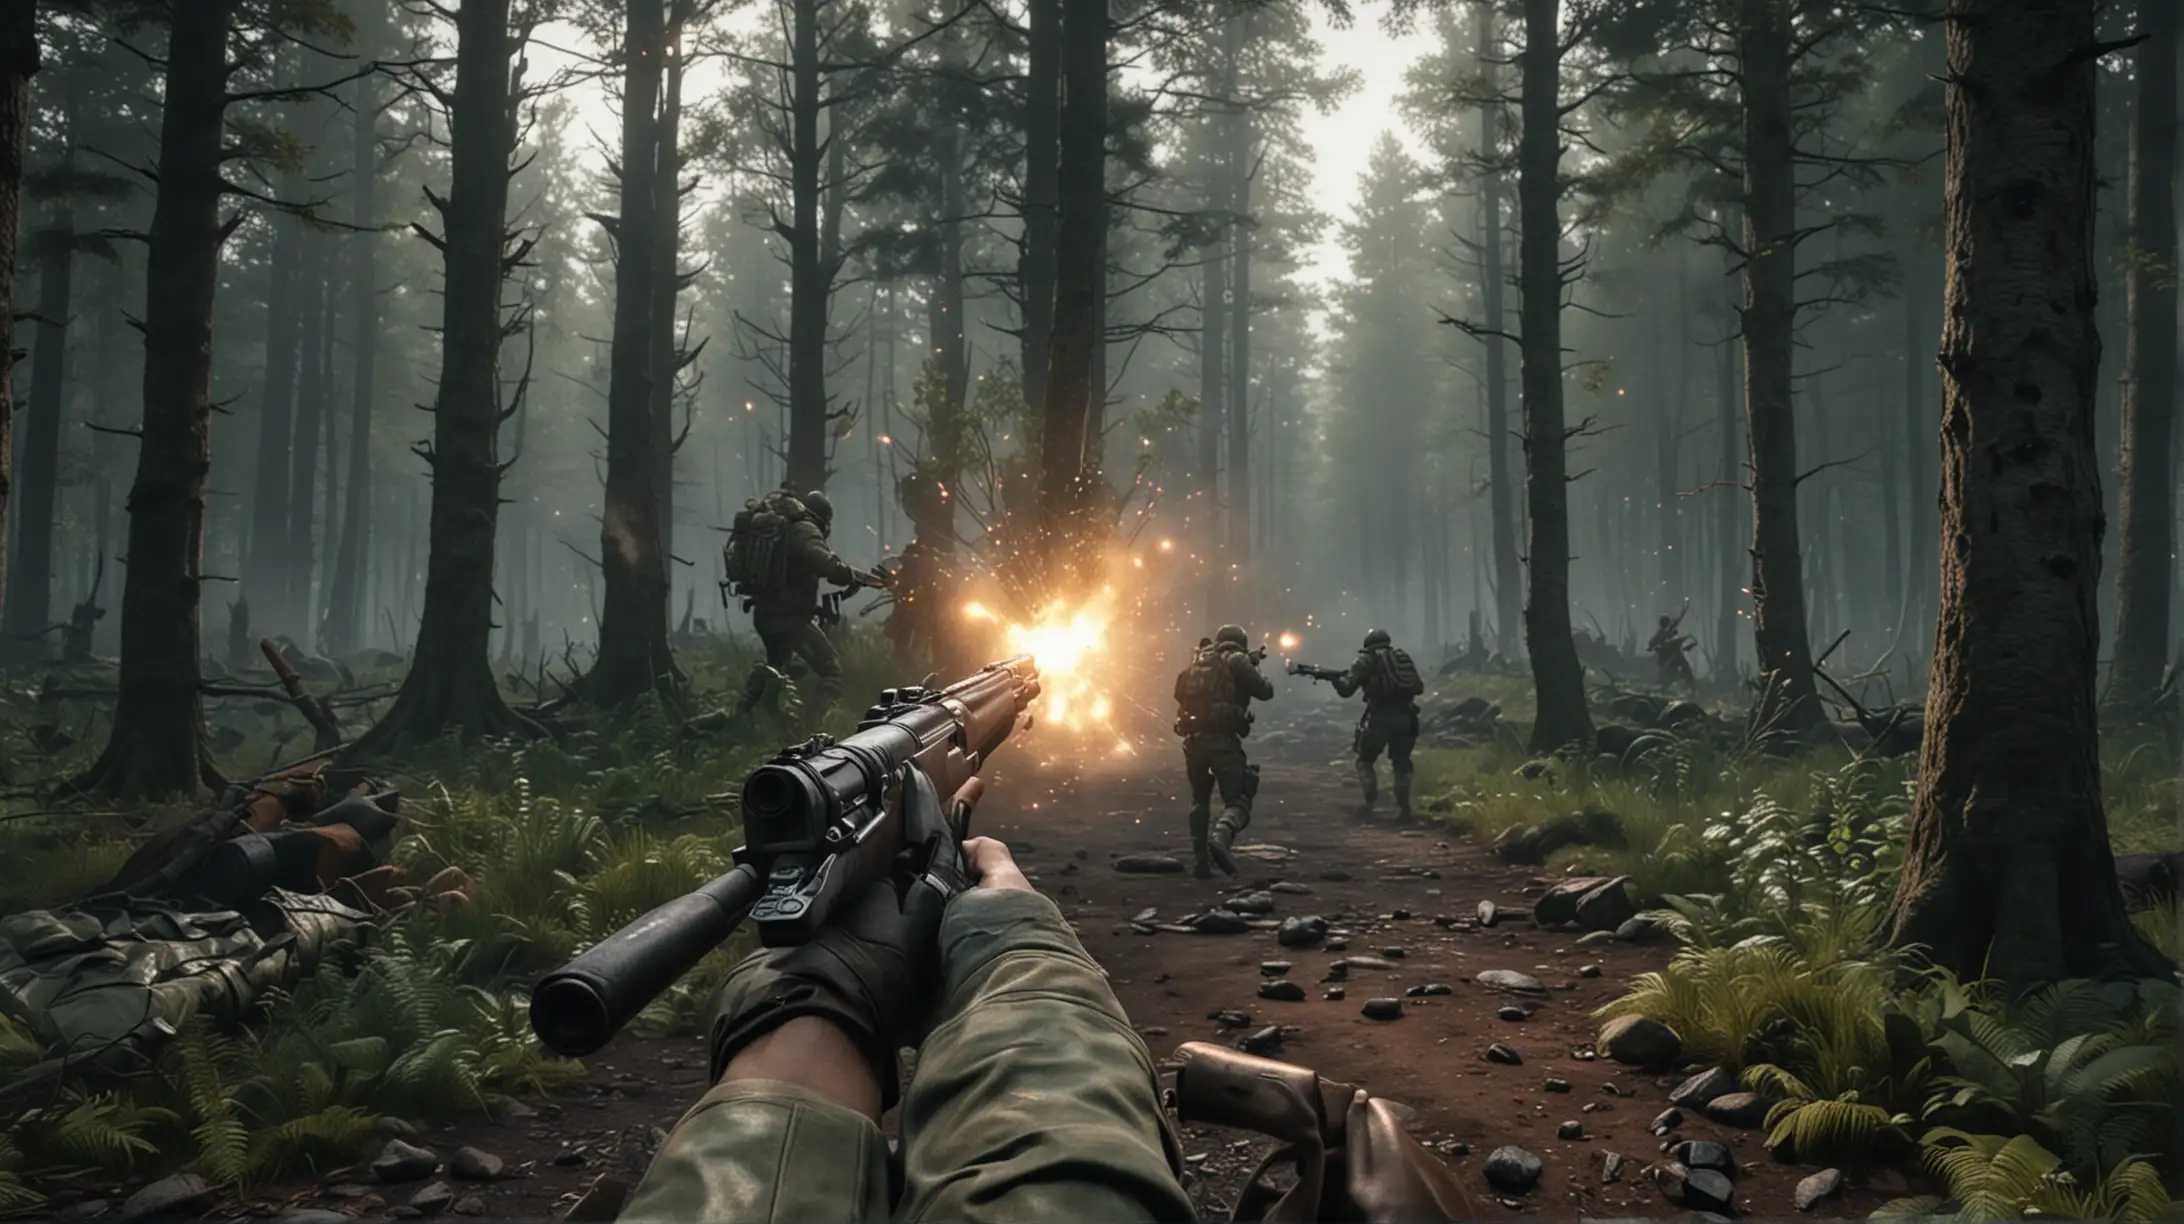 First Person Shooter Soldier Firing Gun in Dimly Lit Forest